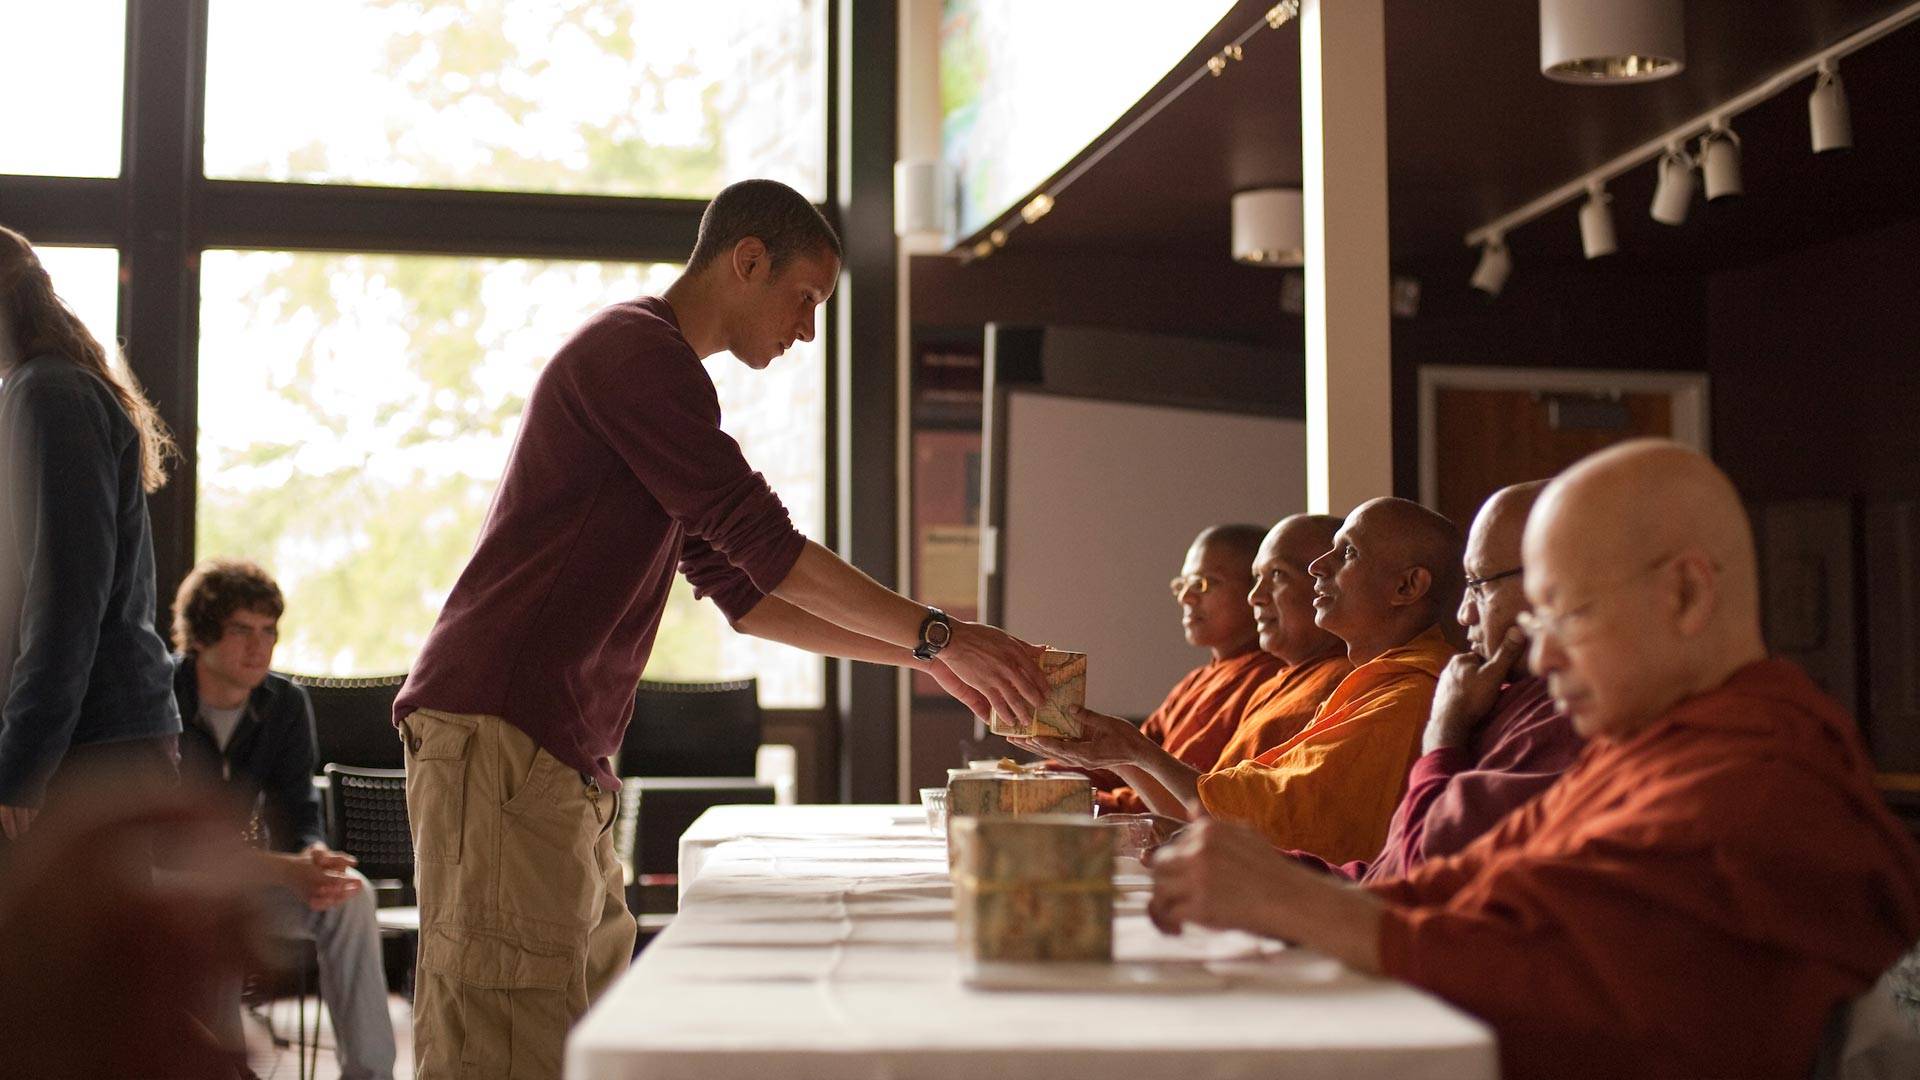 Members of the Colgate community took part in a Dana, an act of giving or making an offering to the Sangha, the monastic order of ordained Buddhist monks or nuns.